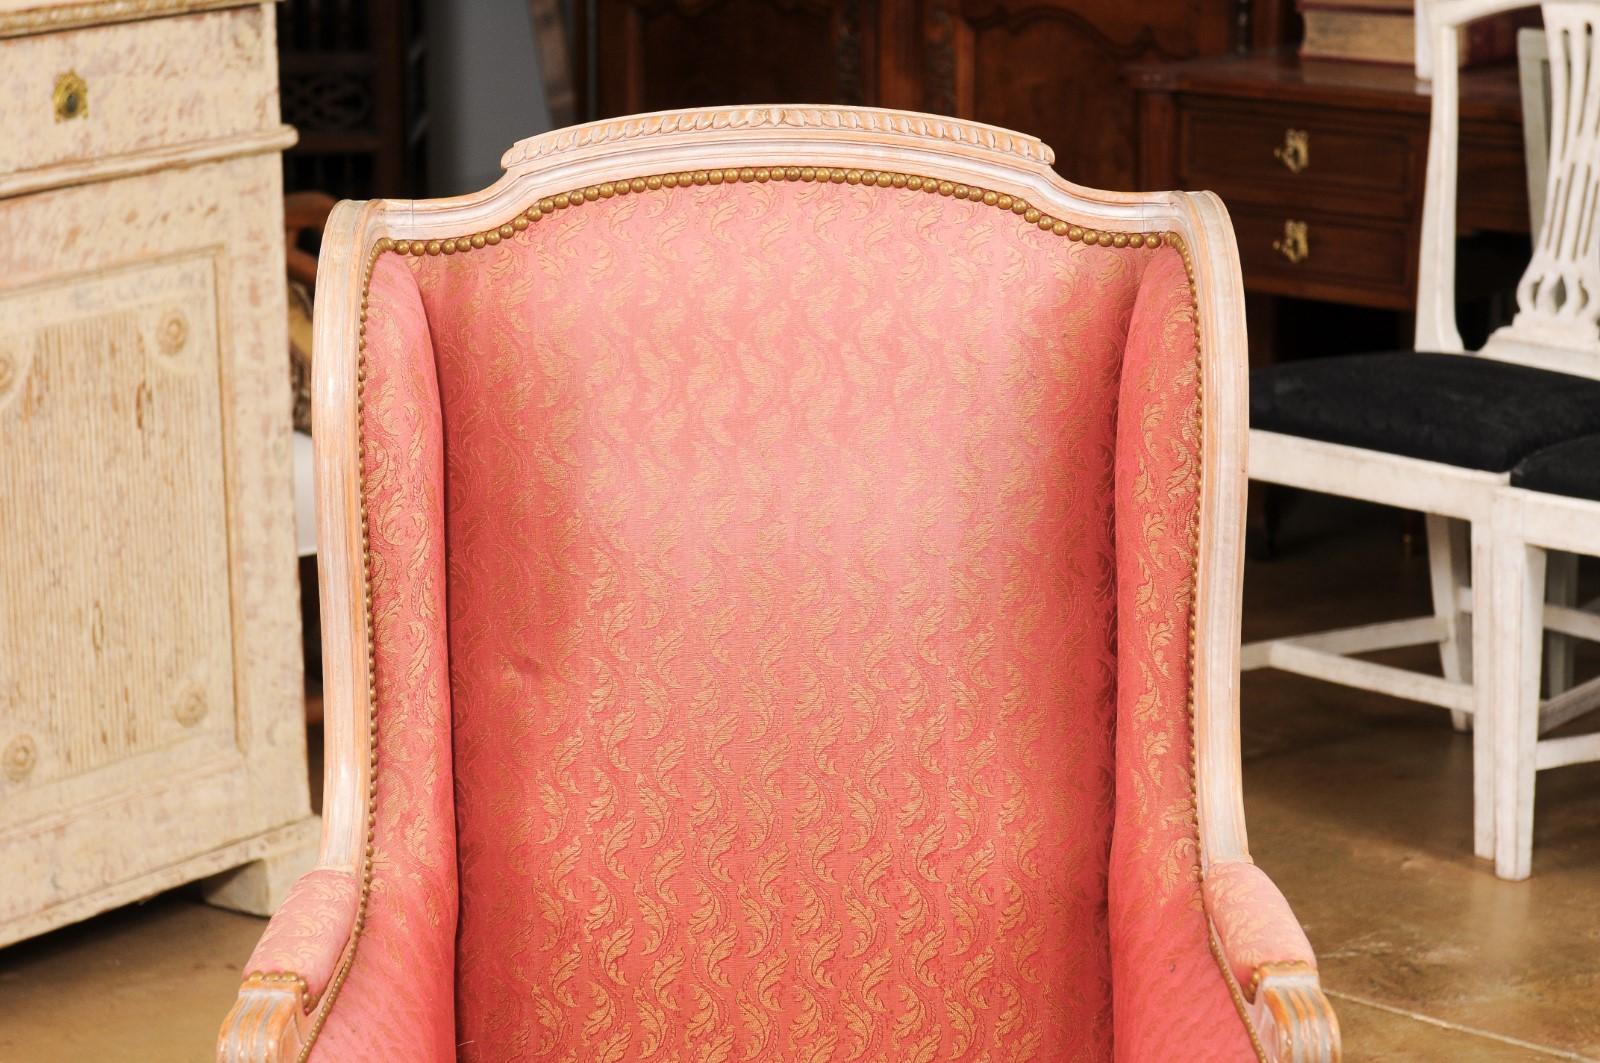 A pair of French Louis XVI style painted wood bergère chairs from the early 20th century, with carved décor and foliage-themed upholstery. Created in France at the Turn of the Century, this pair of bergères showcases the stylistic characteristics of